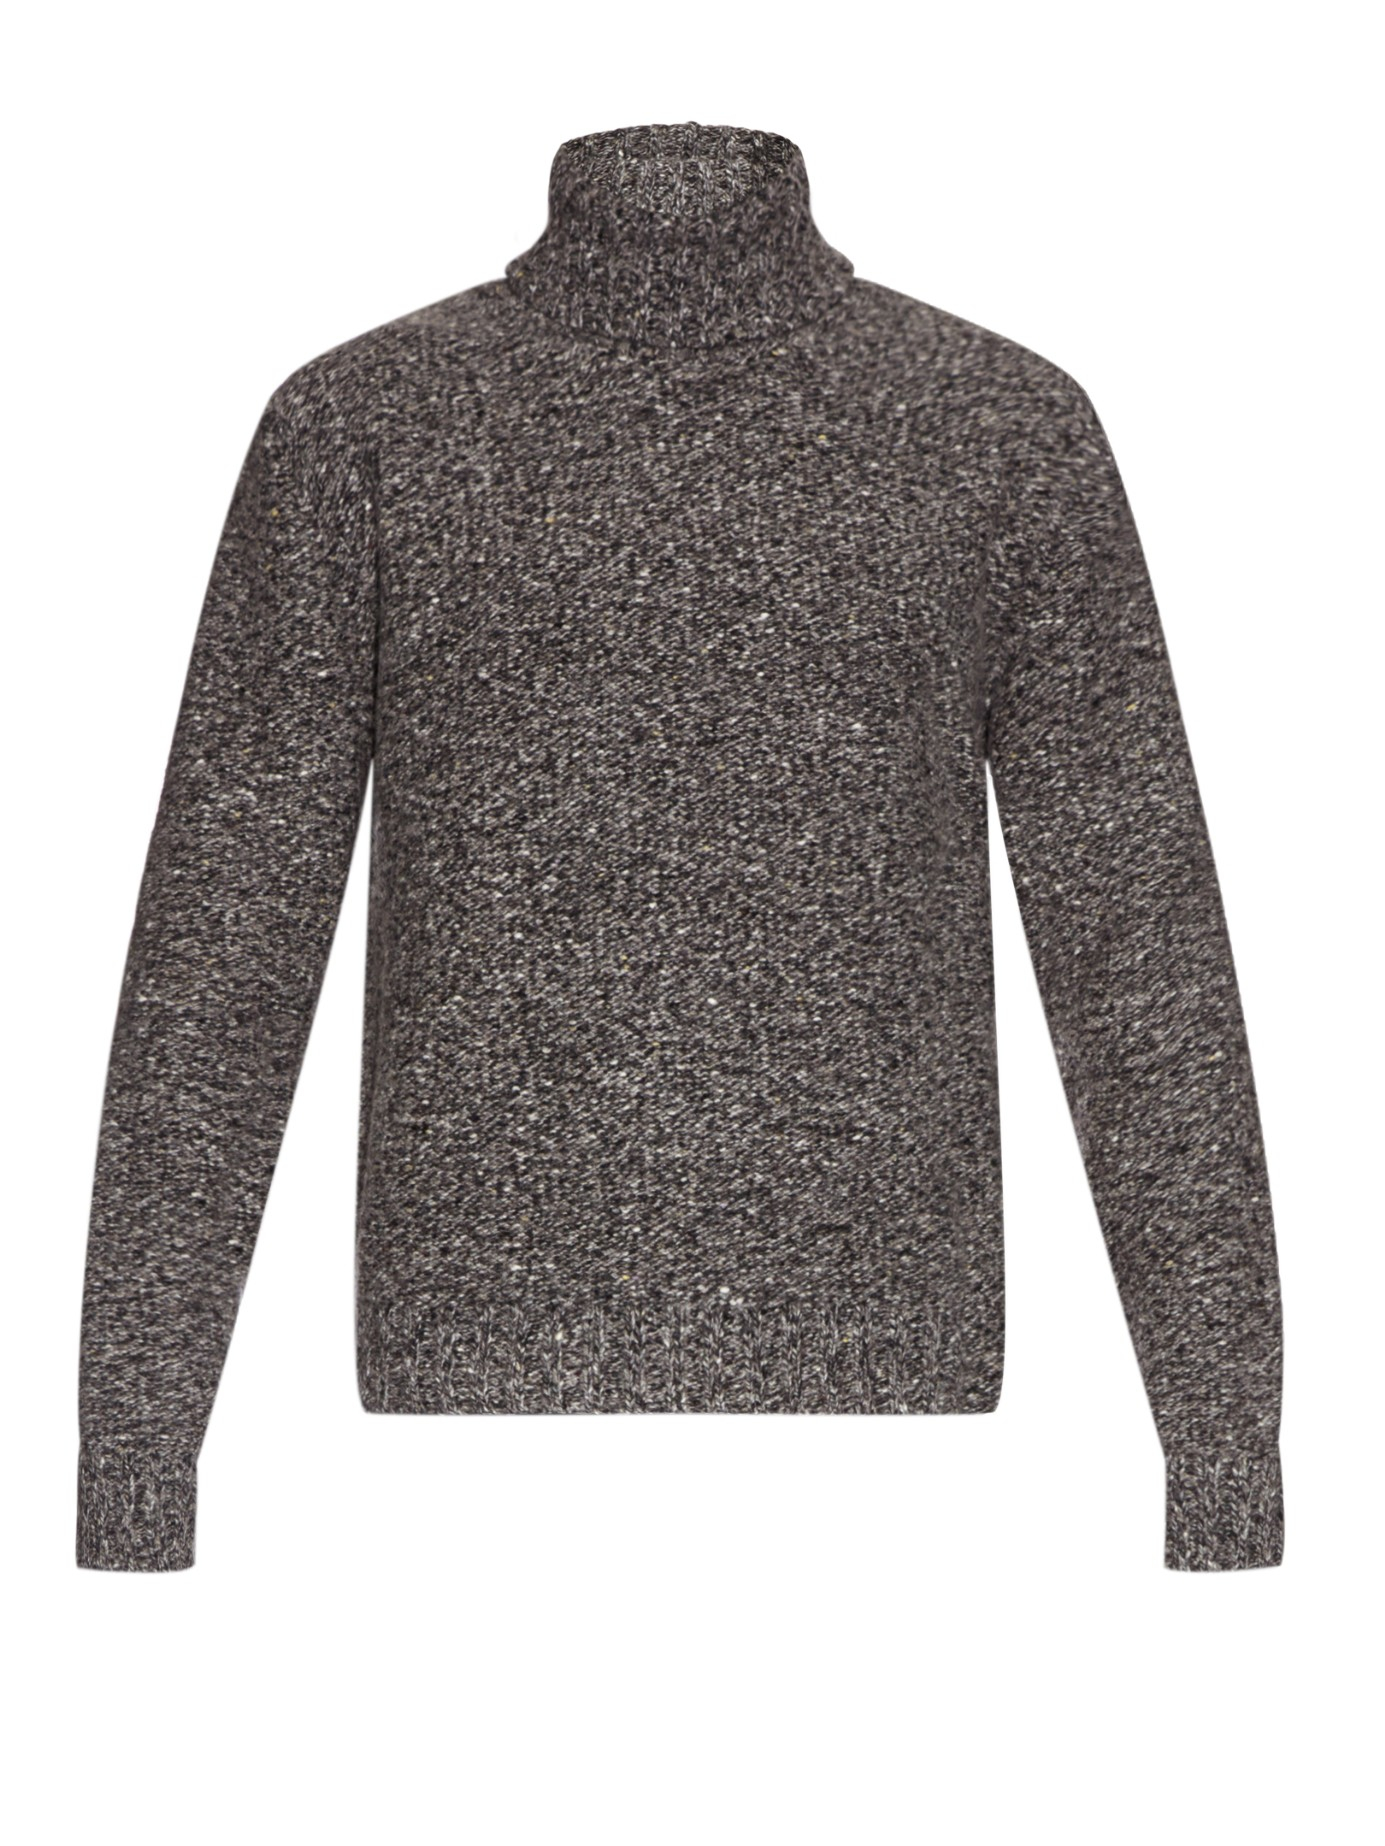 Lyst - Valentino Flecked Wool And Cashmere-blend Sweater in Gray for Men